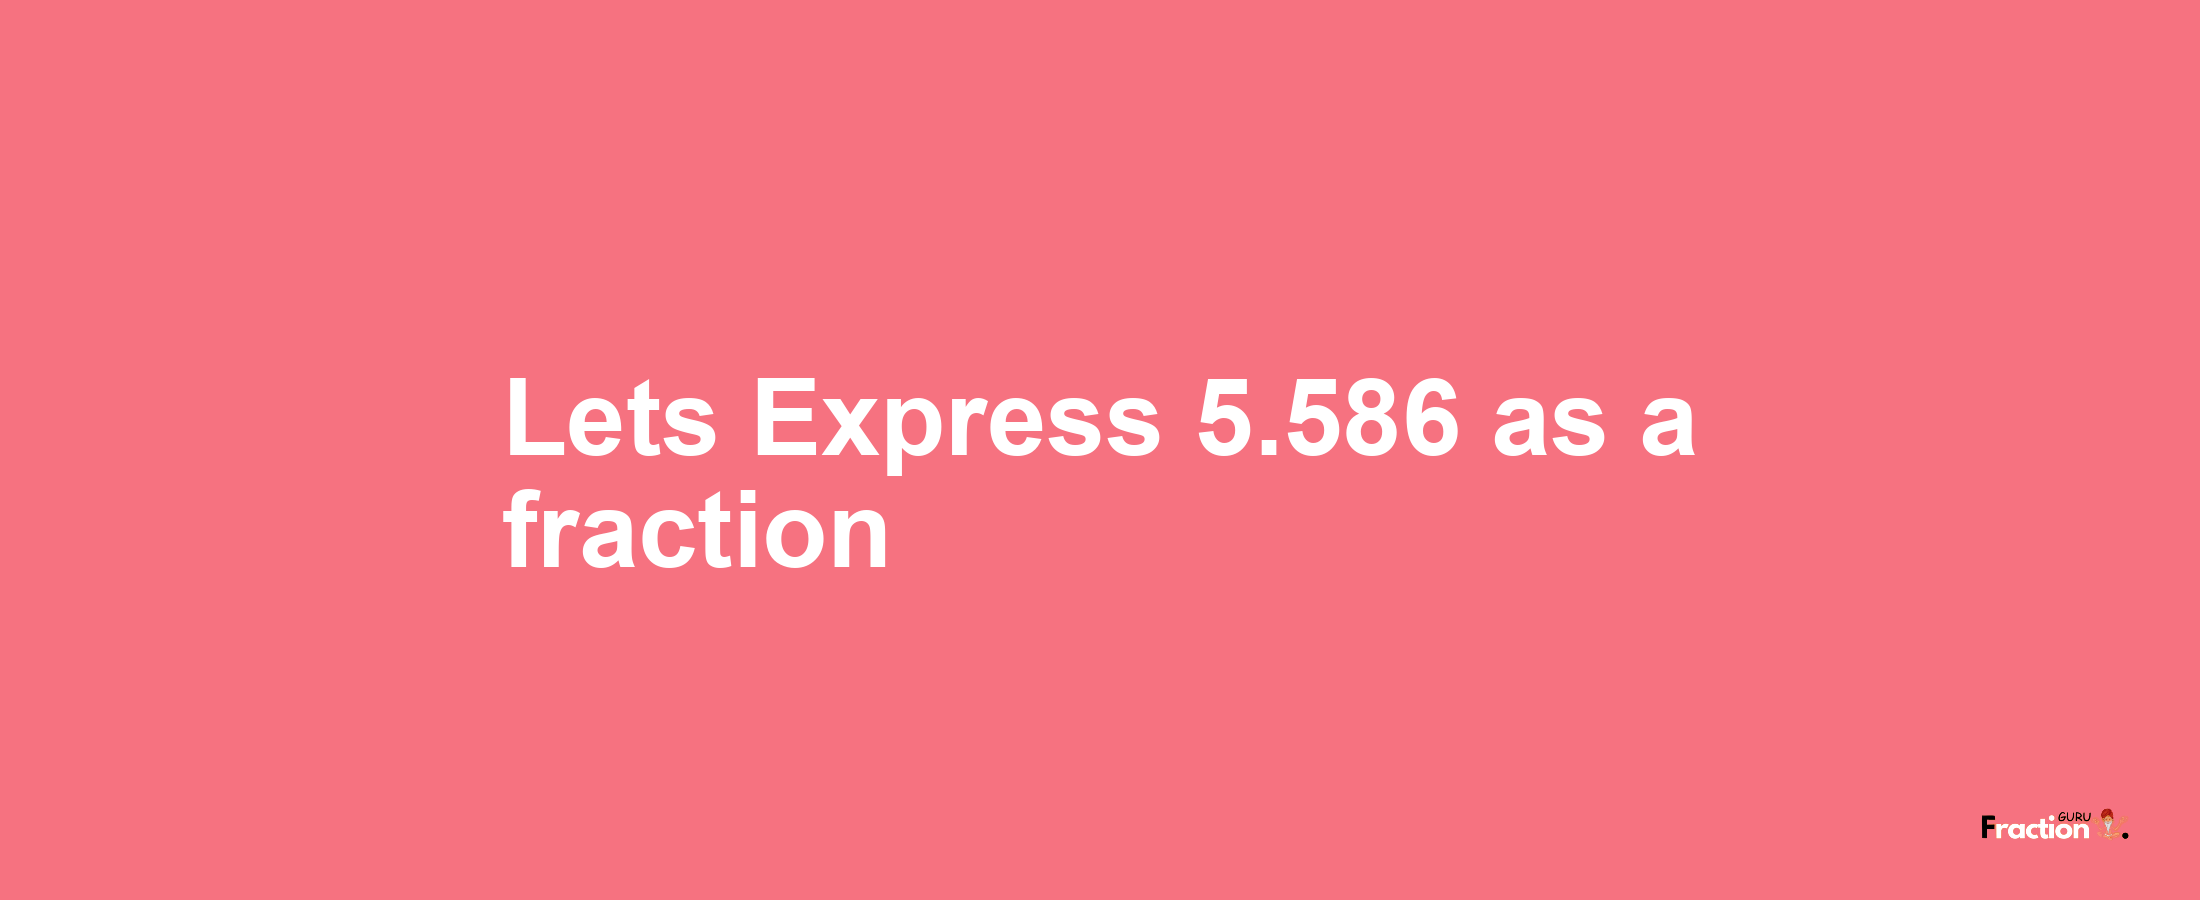 Lets Express 5.586 as afraction